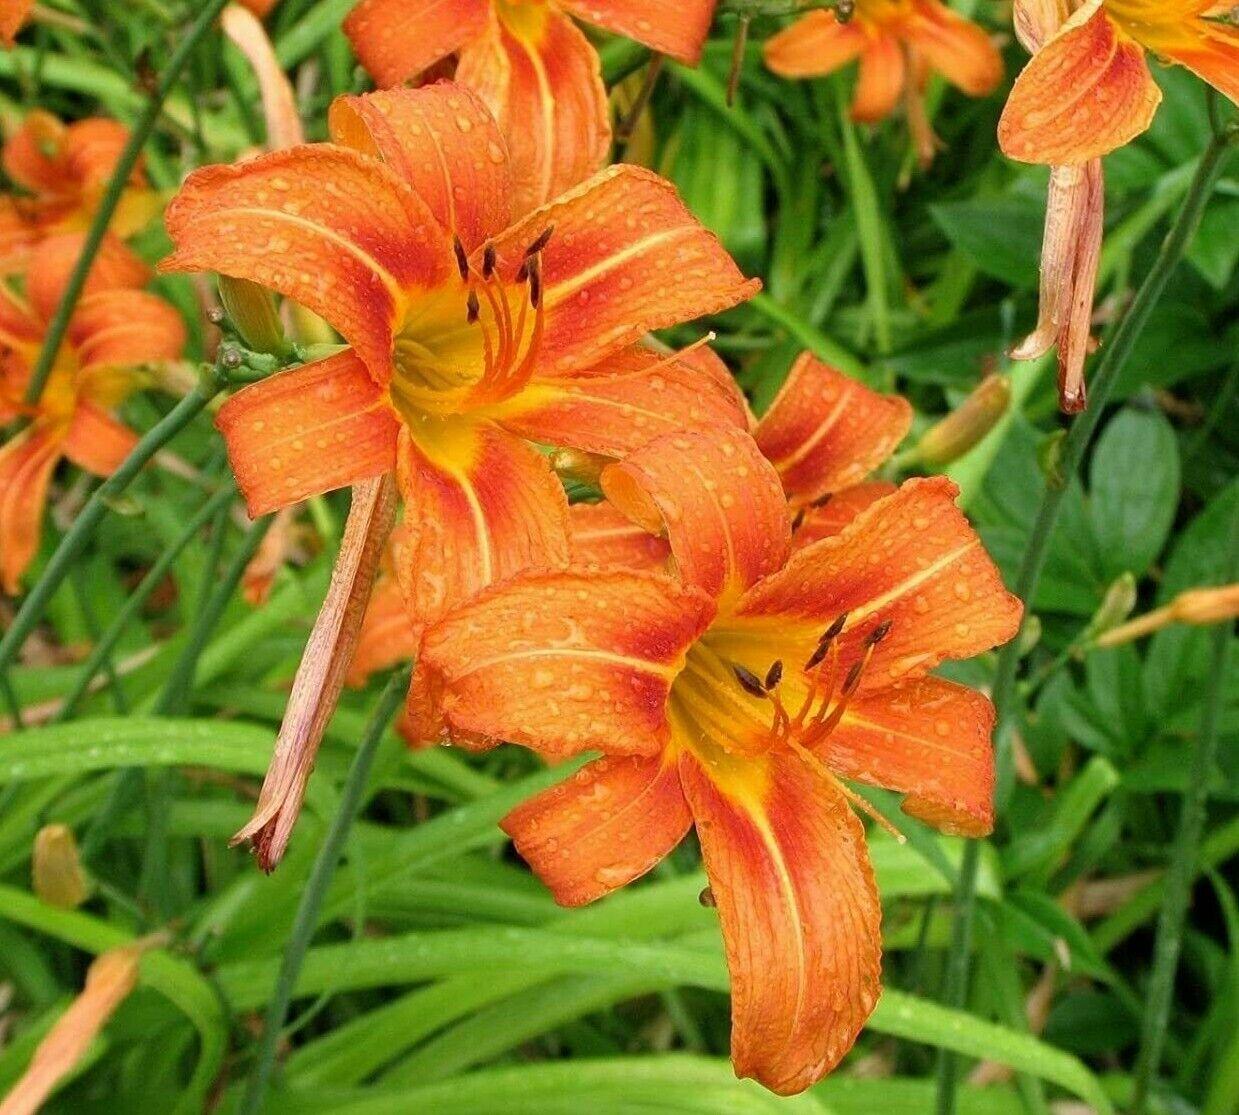 50 Orange Daylily Bulbs - Ditch Lily Flowers, Tawny Day Lily - Fingerlings/Bulbs - The Nursery Center